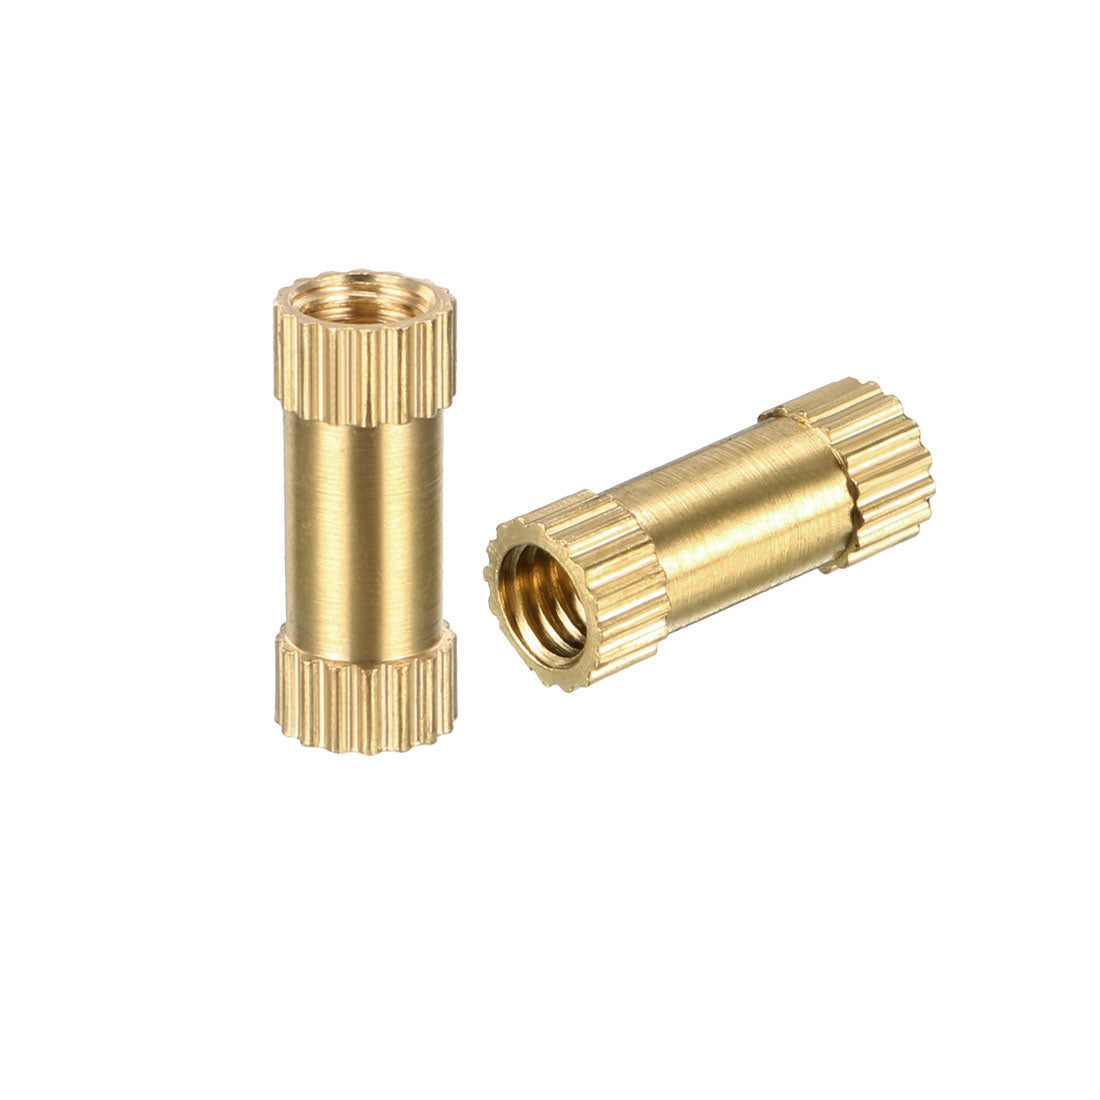 uxcell Uxcell Knurled Insert Nuts, Brass Threaded Insert Embedment Nut for 3D Printer